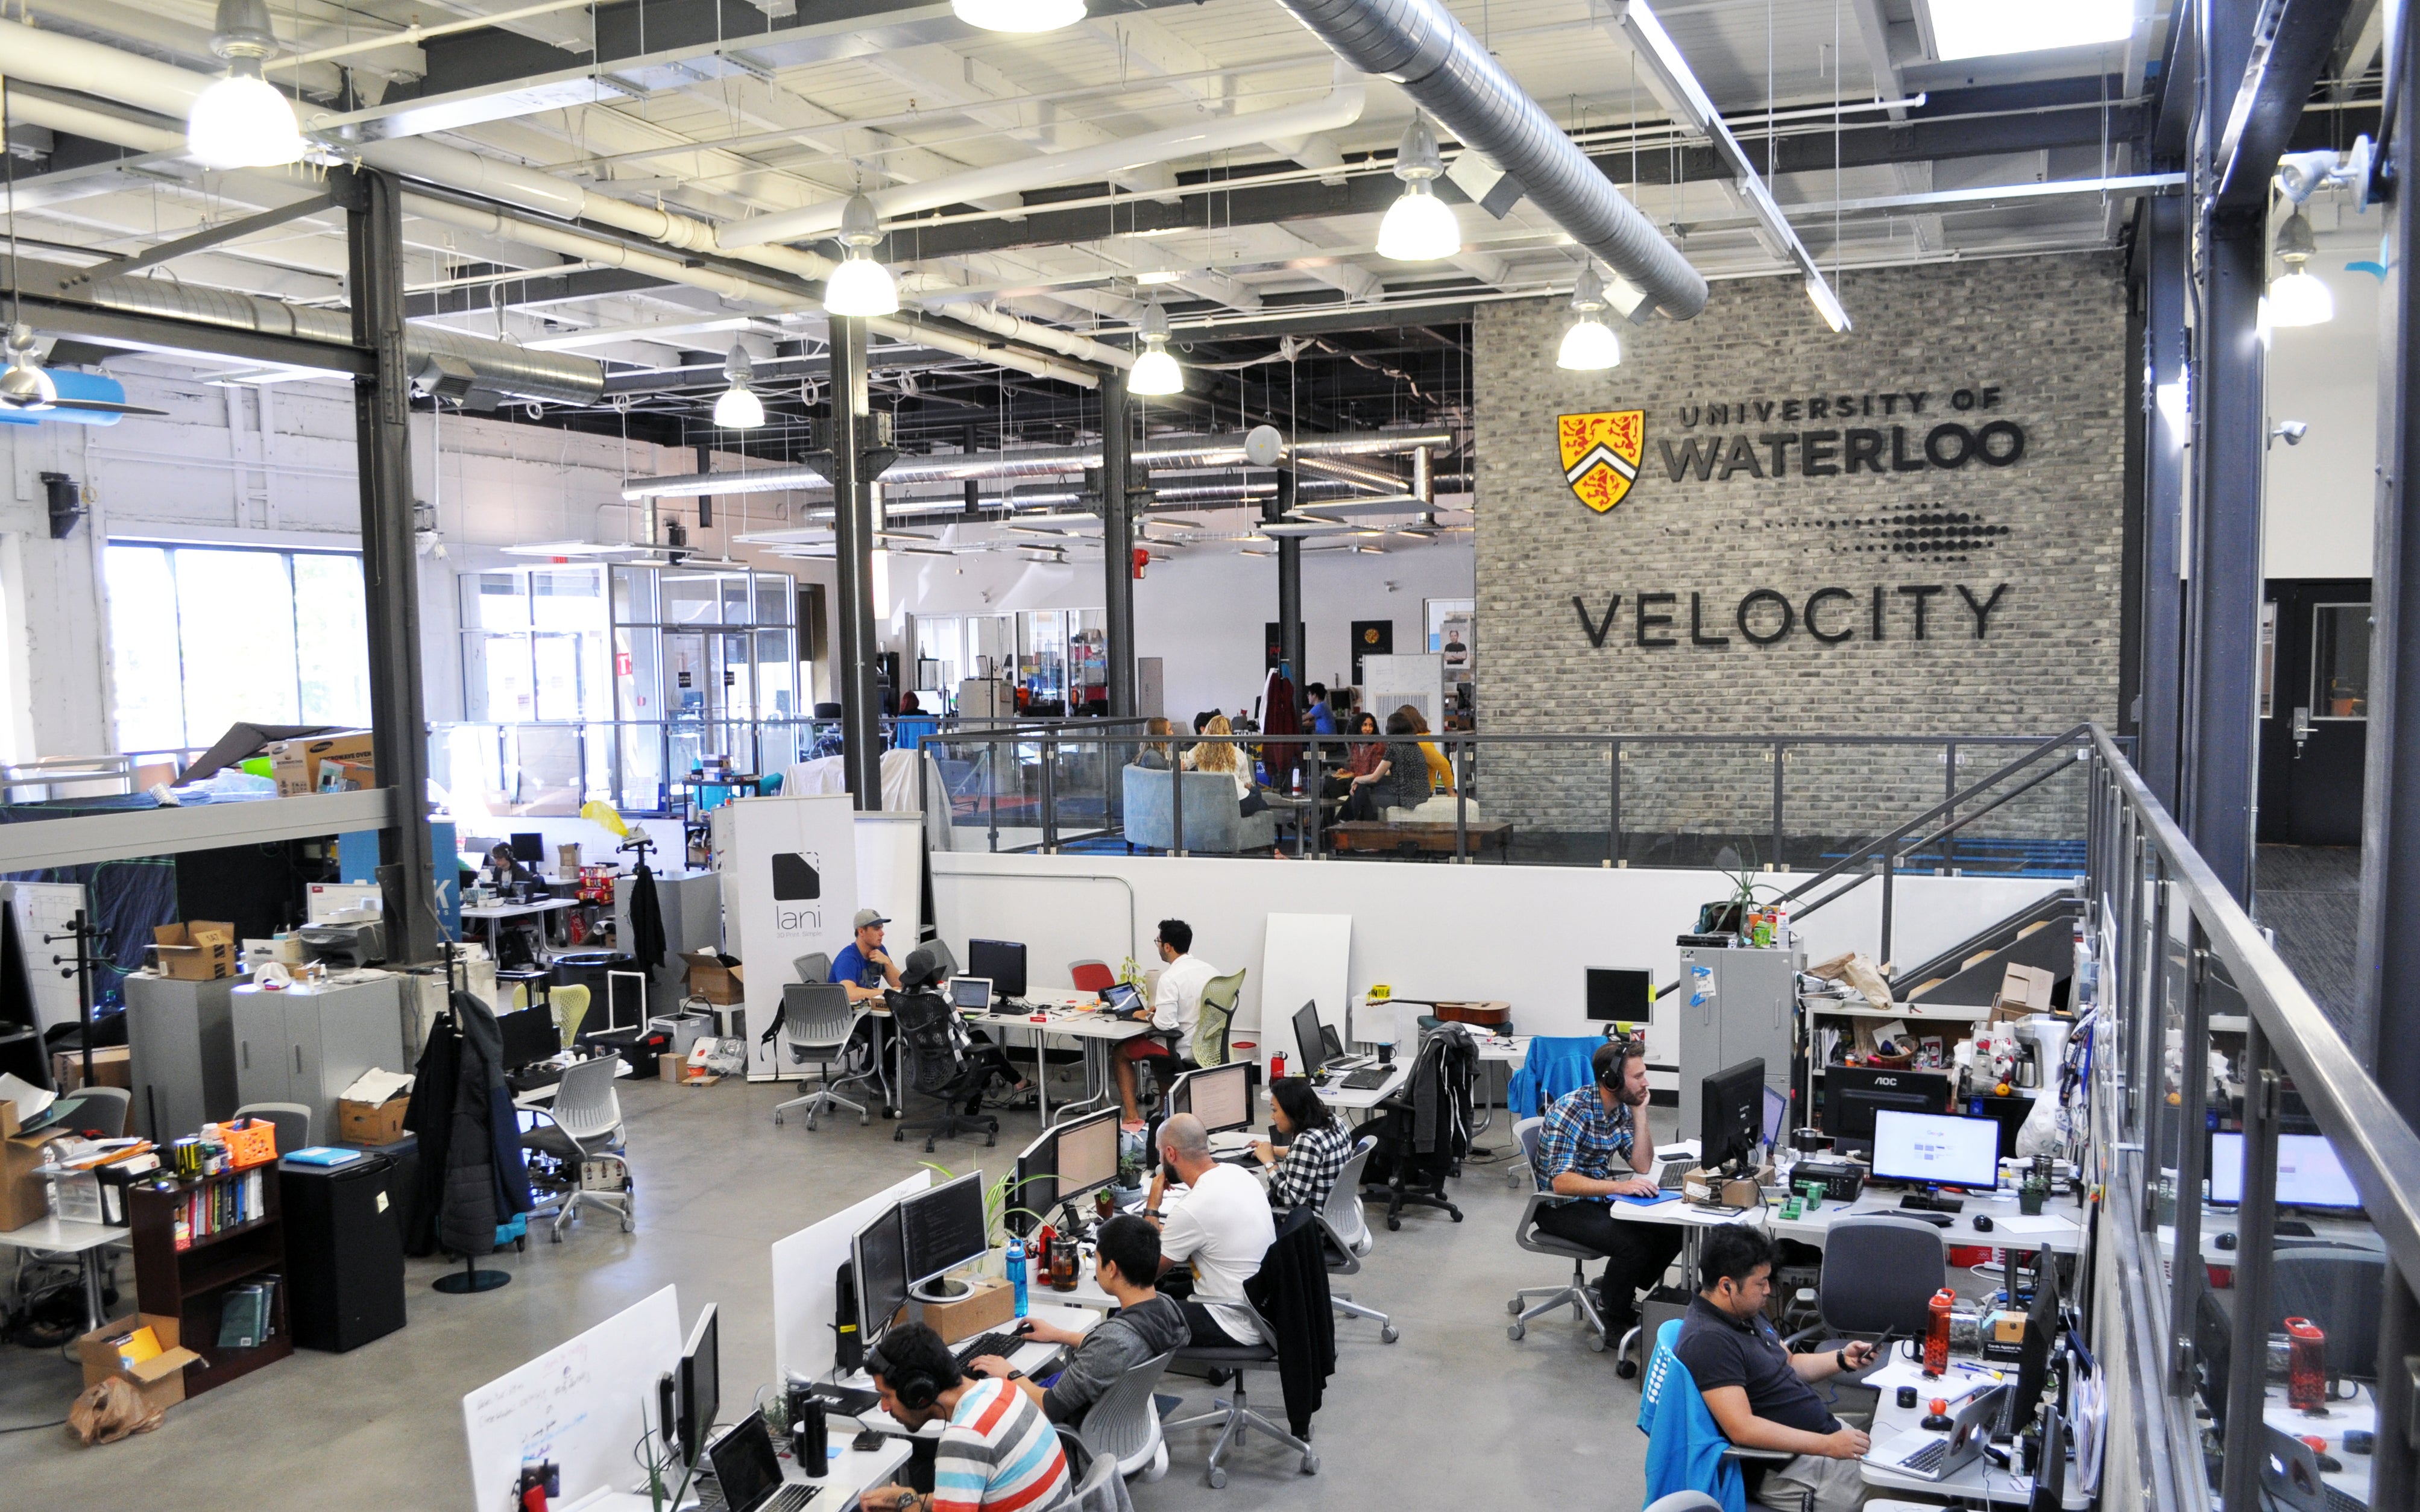 Open workspace with Velocity sign